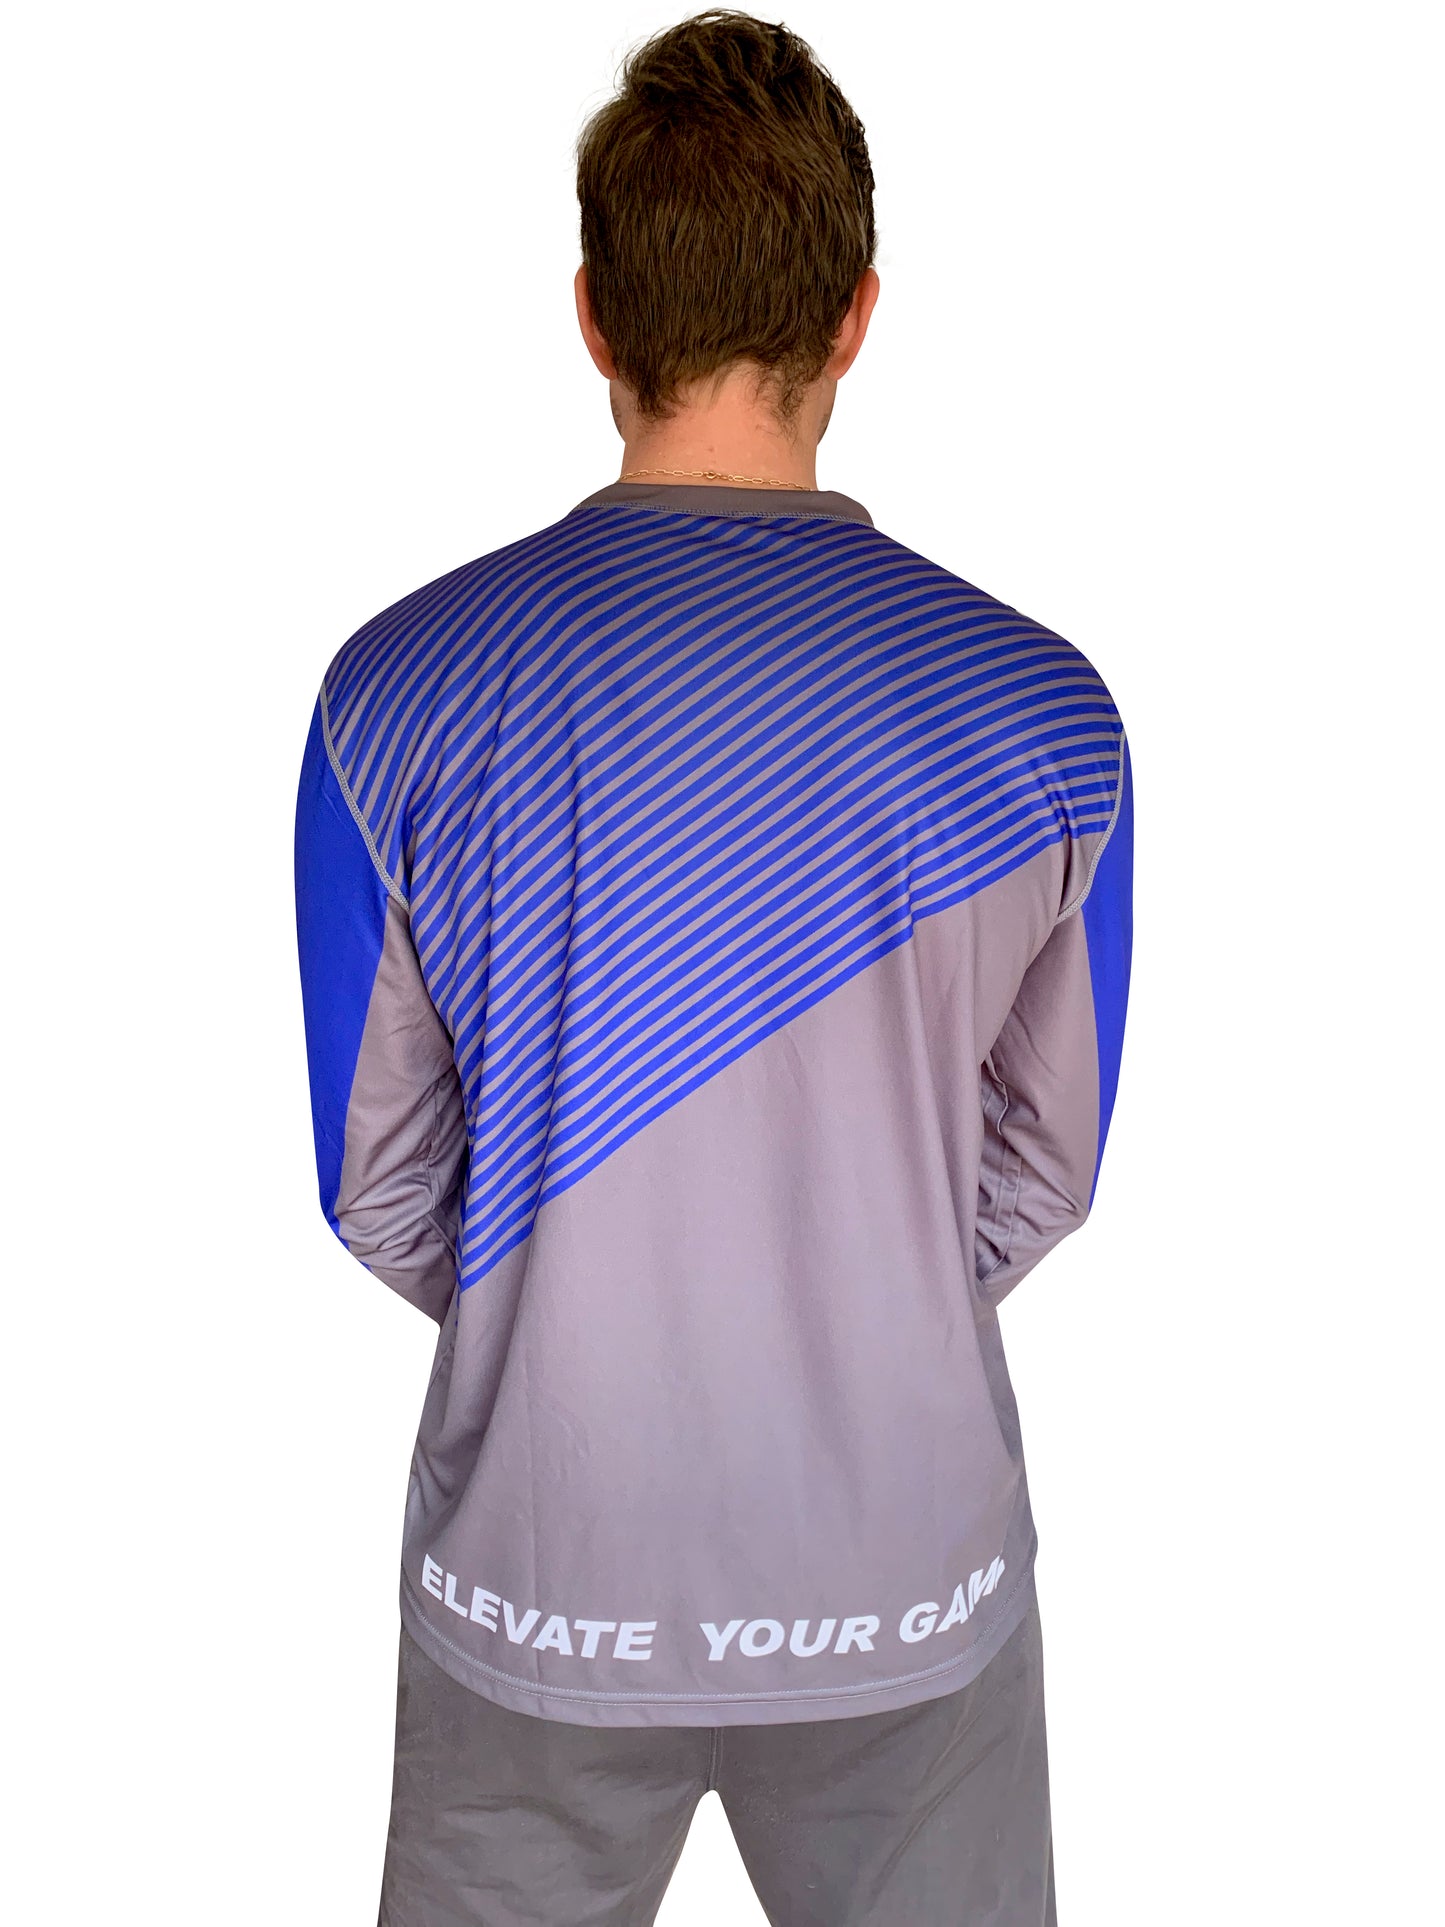 Elevate Lacrosse Shooting Shirt great for workouts or Hanging